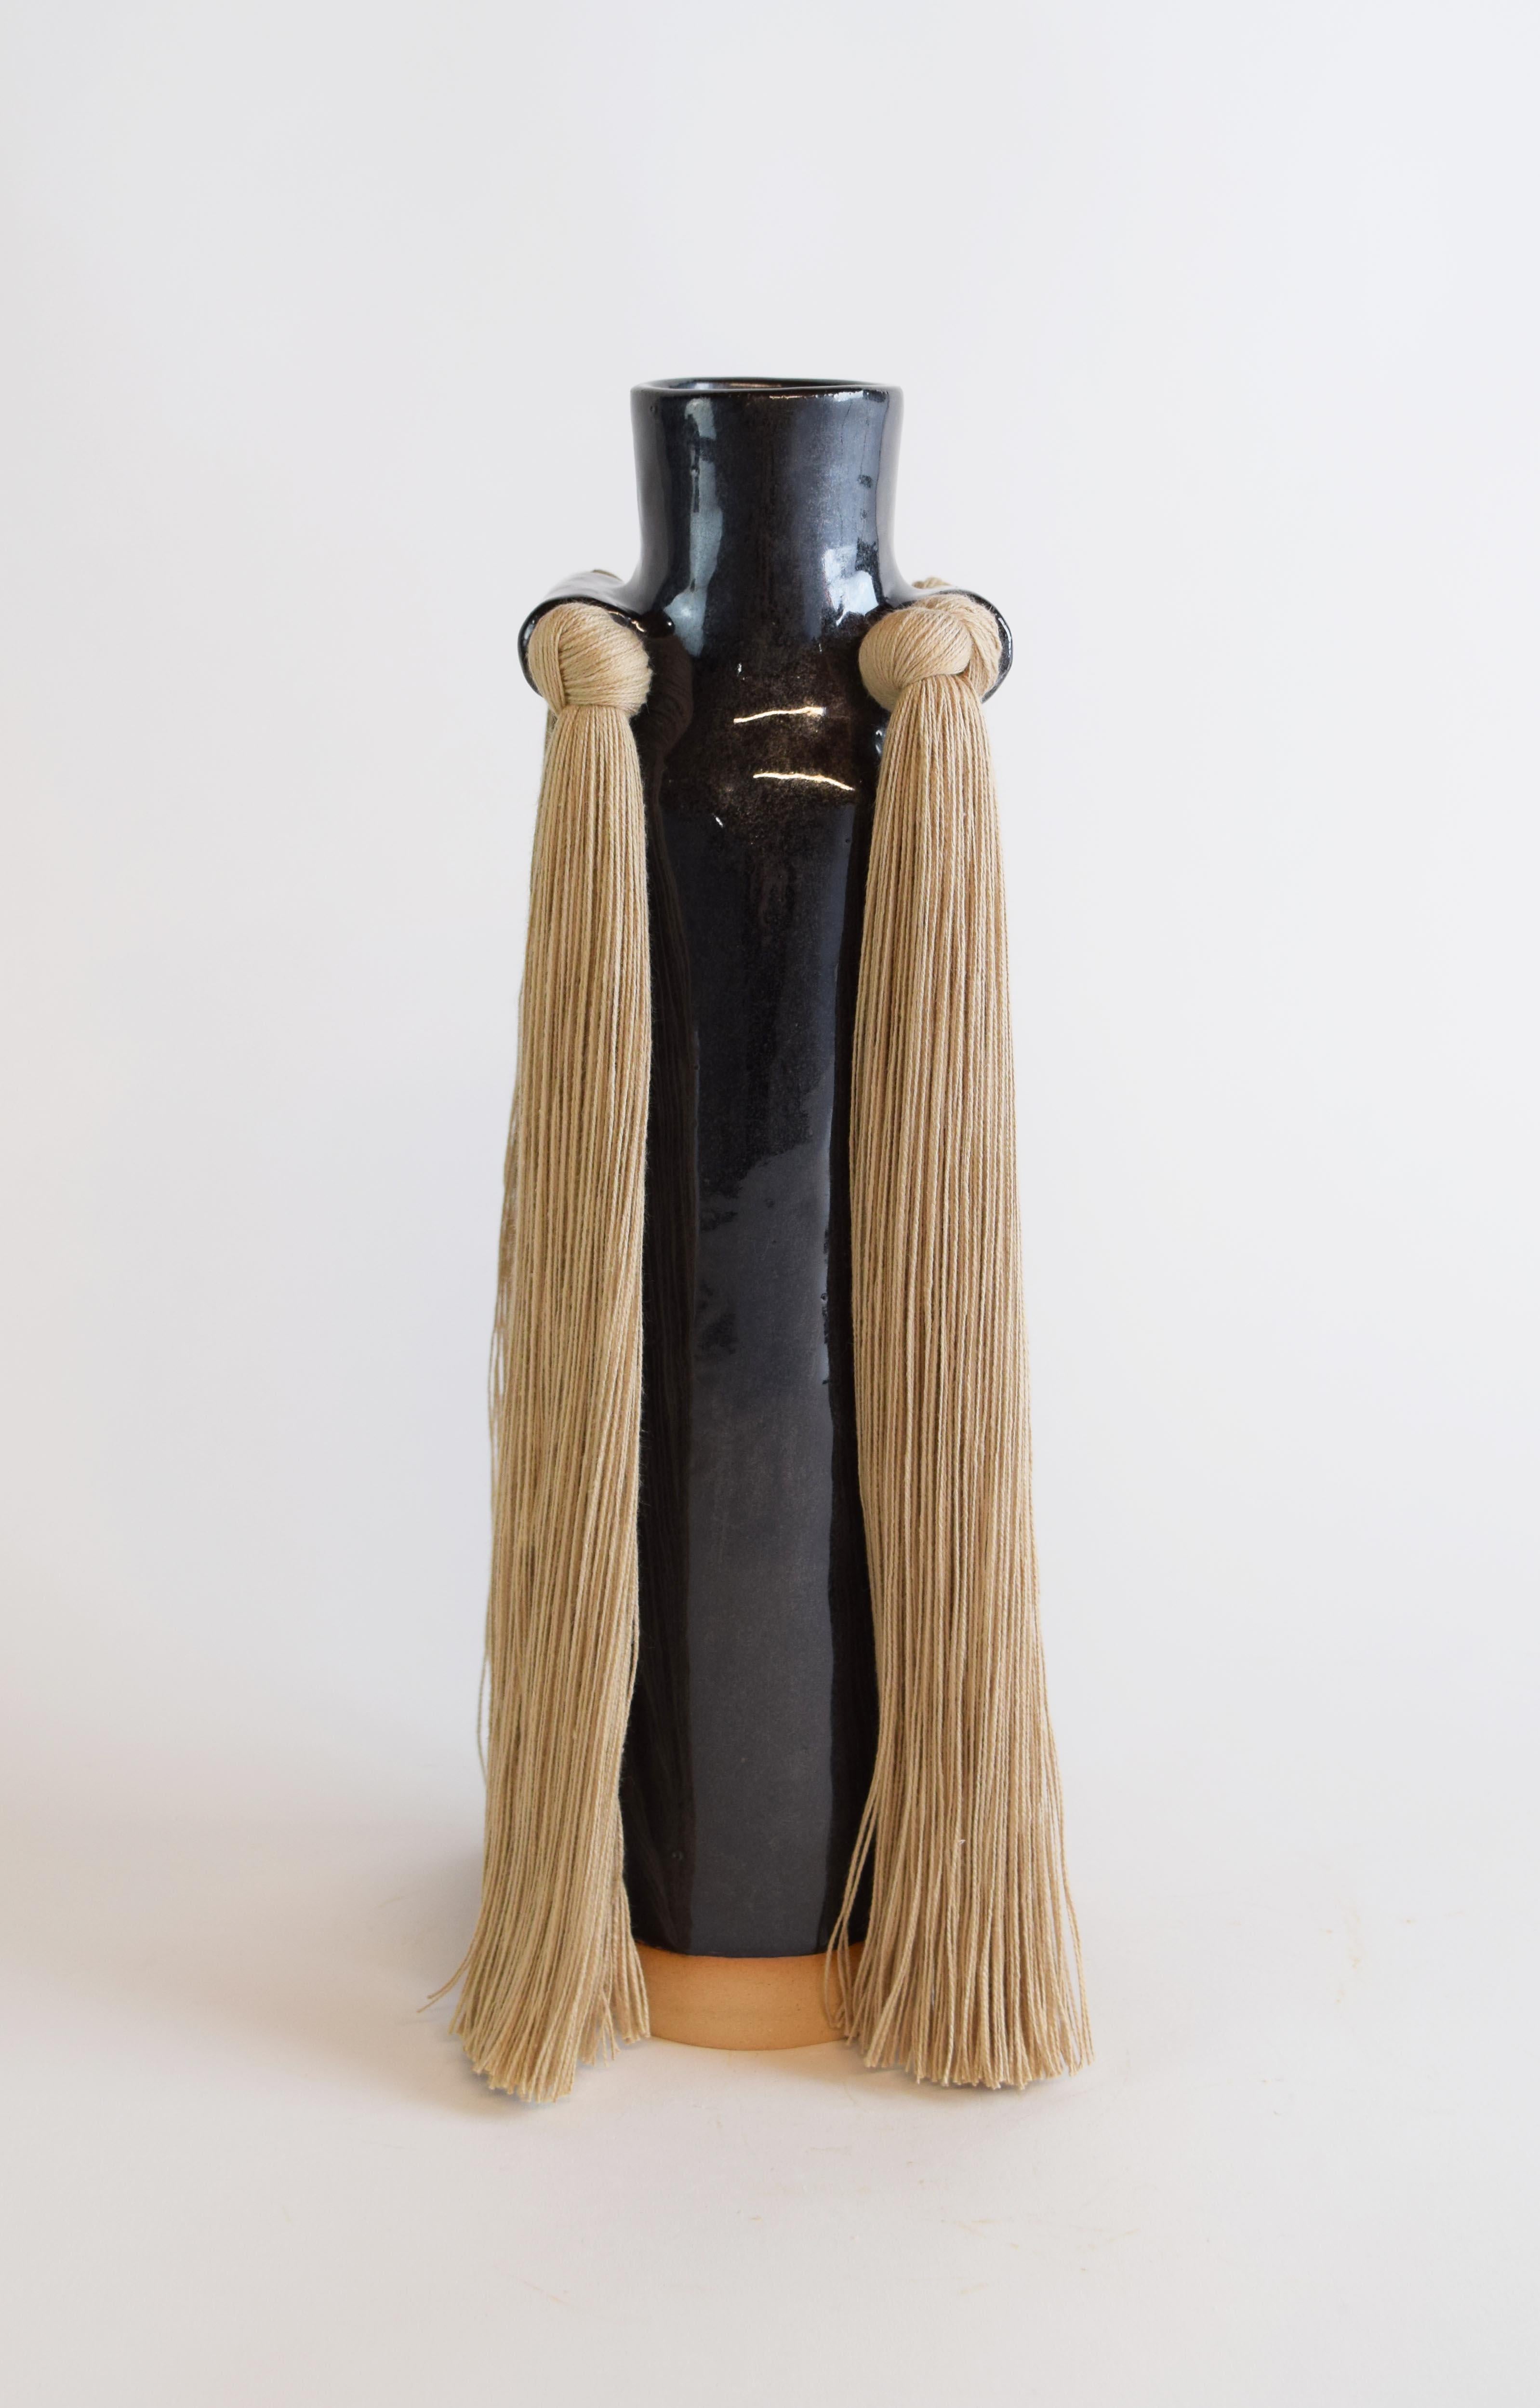 Vase #703 by Karen Gayle Tinney

Drawing on signature details from other Standard Collection pieces, this vase is an update to a traditional bottle neck silhouette. 

Hand formed beige stoneware with black glaze. Beige cotton fringe detail. Inside